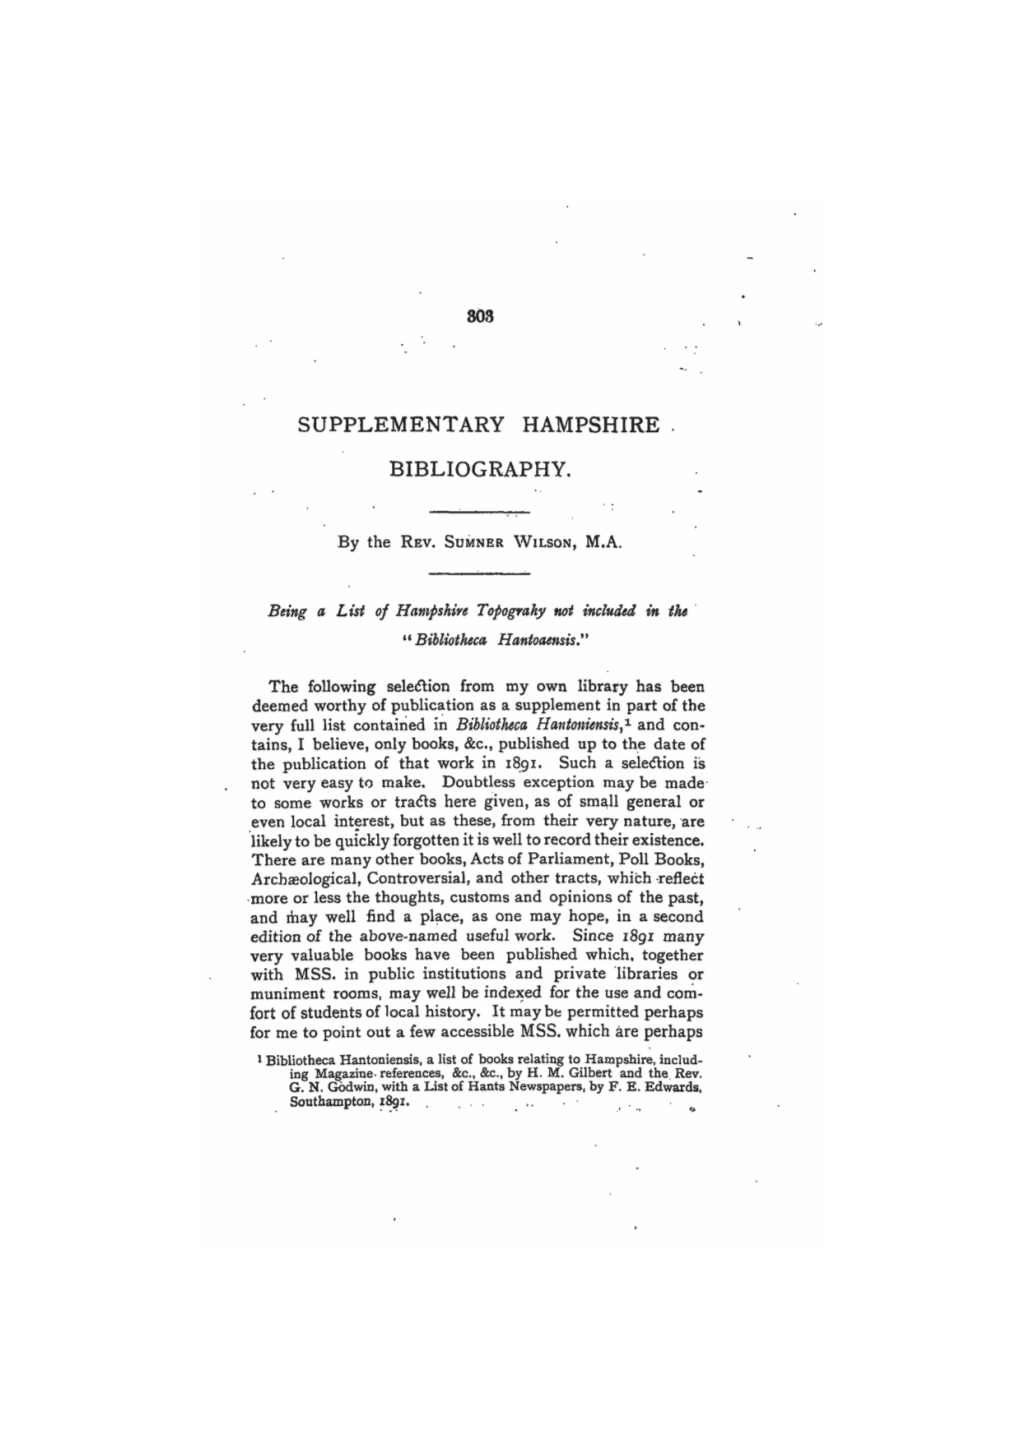 Supplementary Hampshire Bibliography